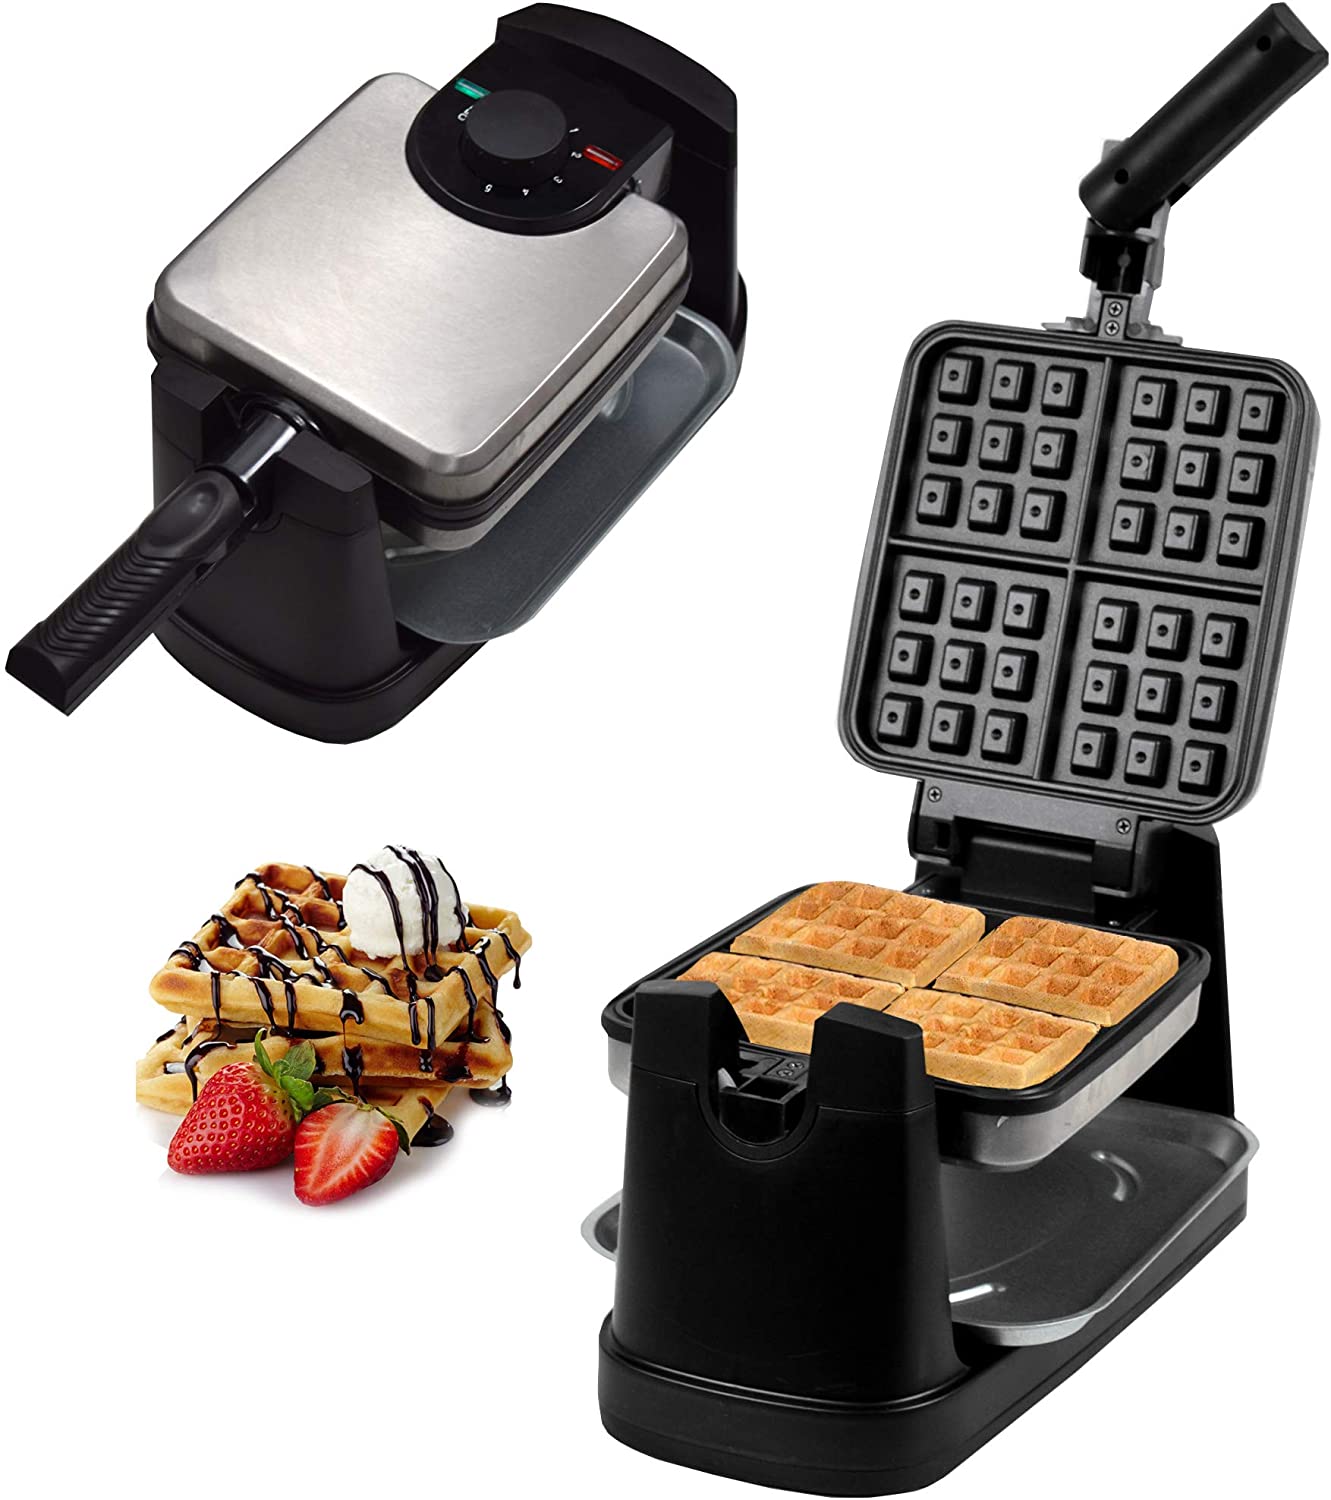 Syntrox Germany Chef Maker 200 degree rotatable Iron Waffle Maker for Belgian Waffles made of stainless steel